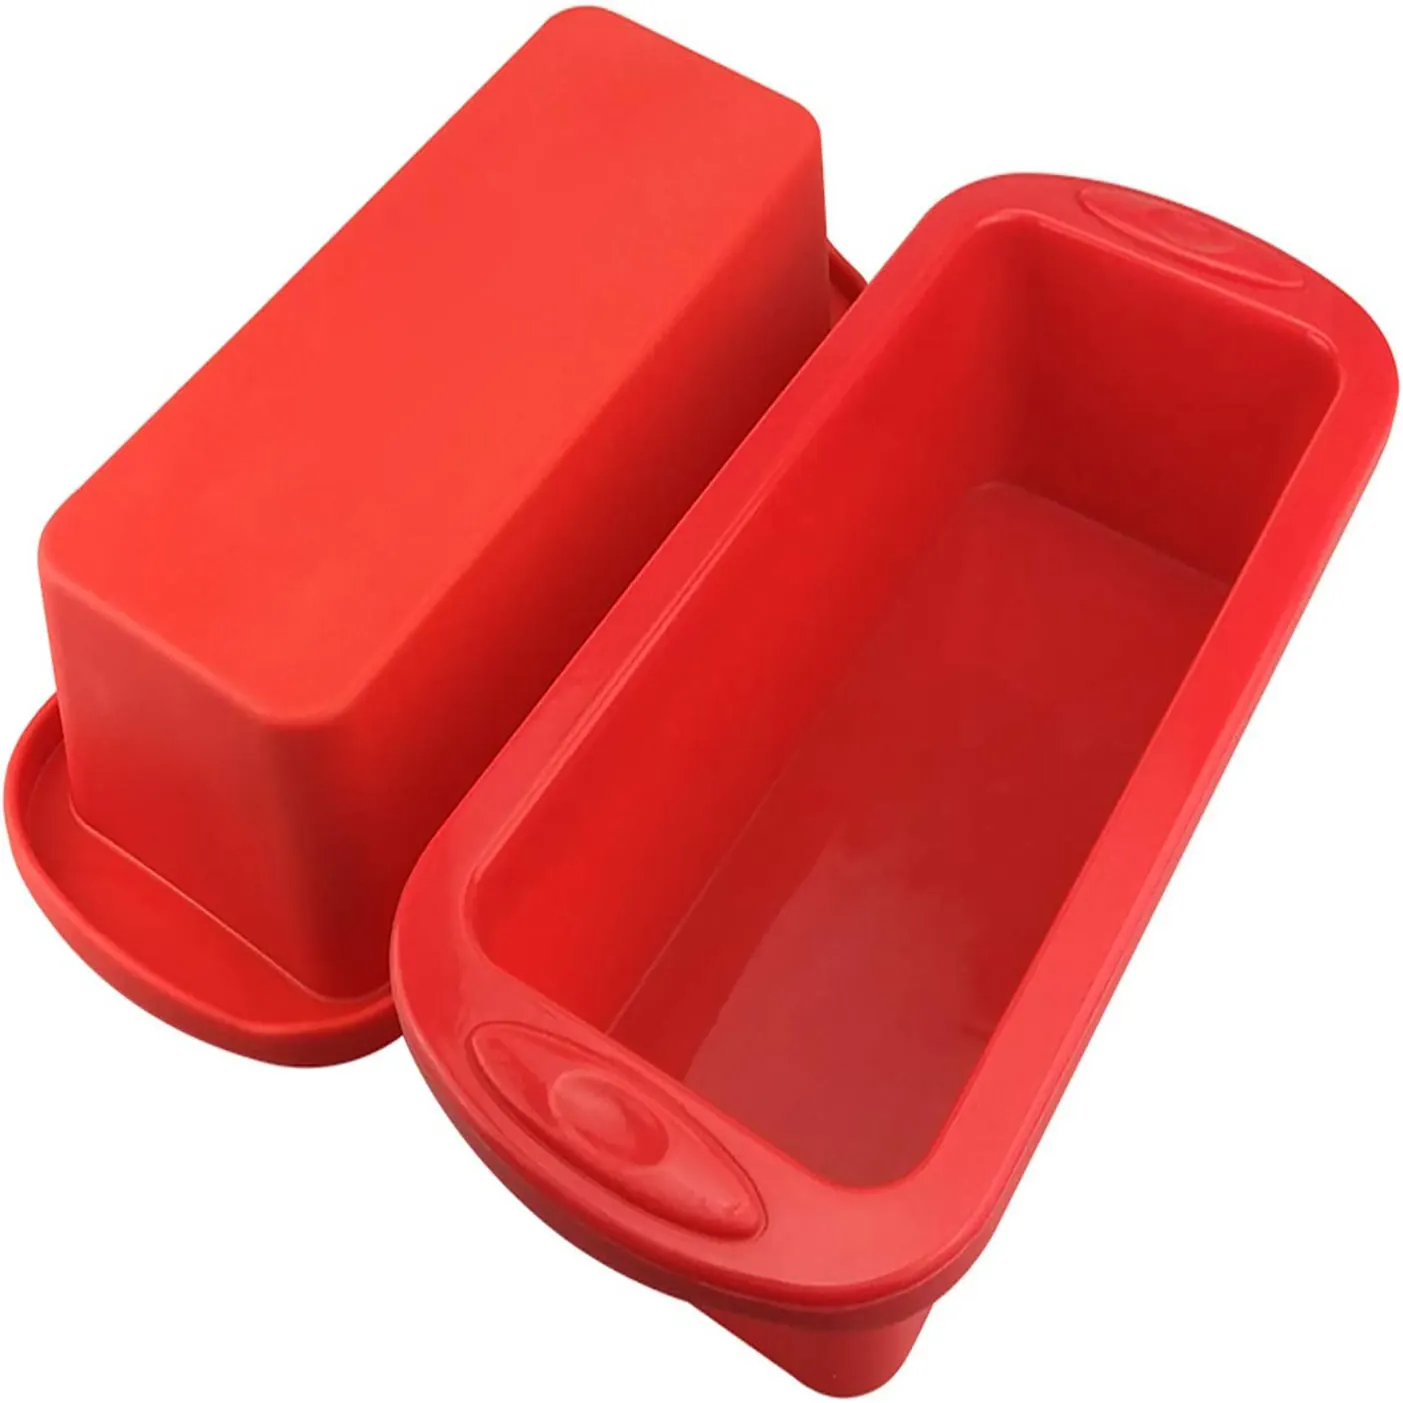 Wholesale Bpa free Food grade Silicone Bread and Loaf Pans Non-Stick Silicone Baking Mold for Homemade Cakes